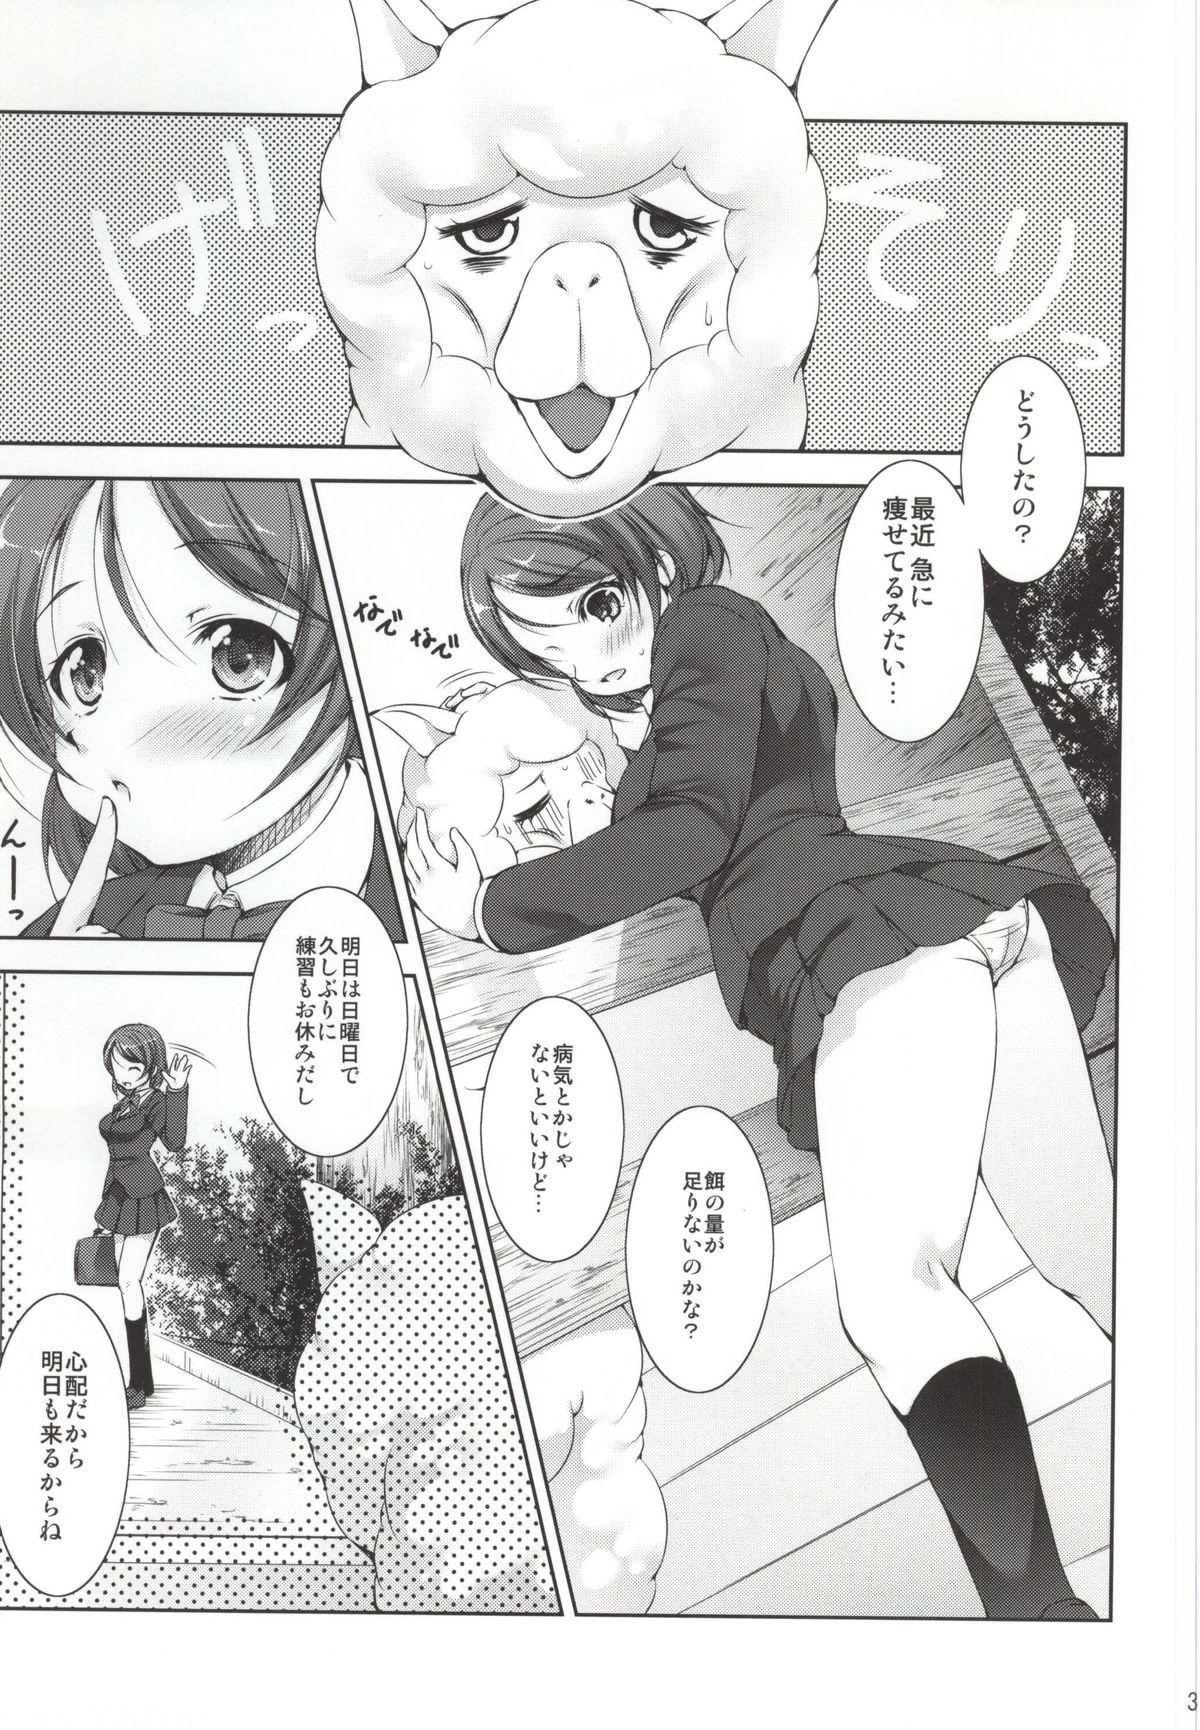 Dykes Alpakan! - Love live Perverted - Page 2